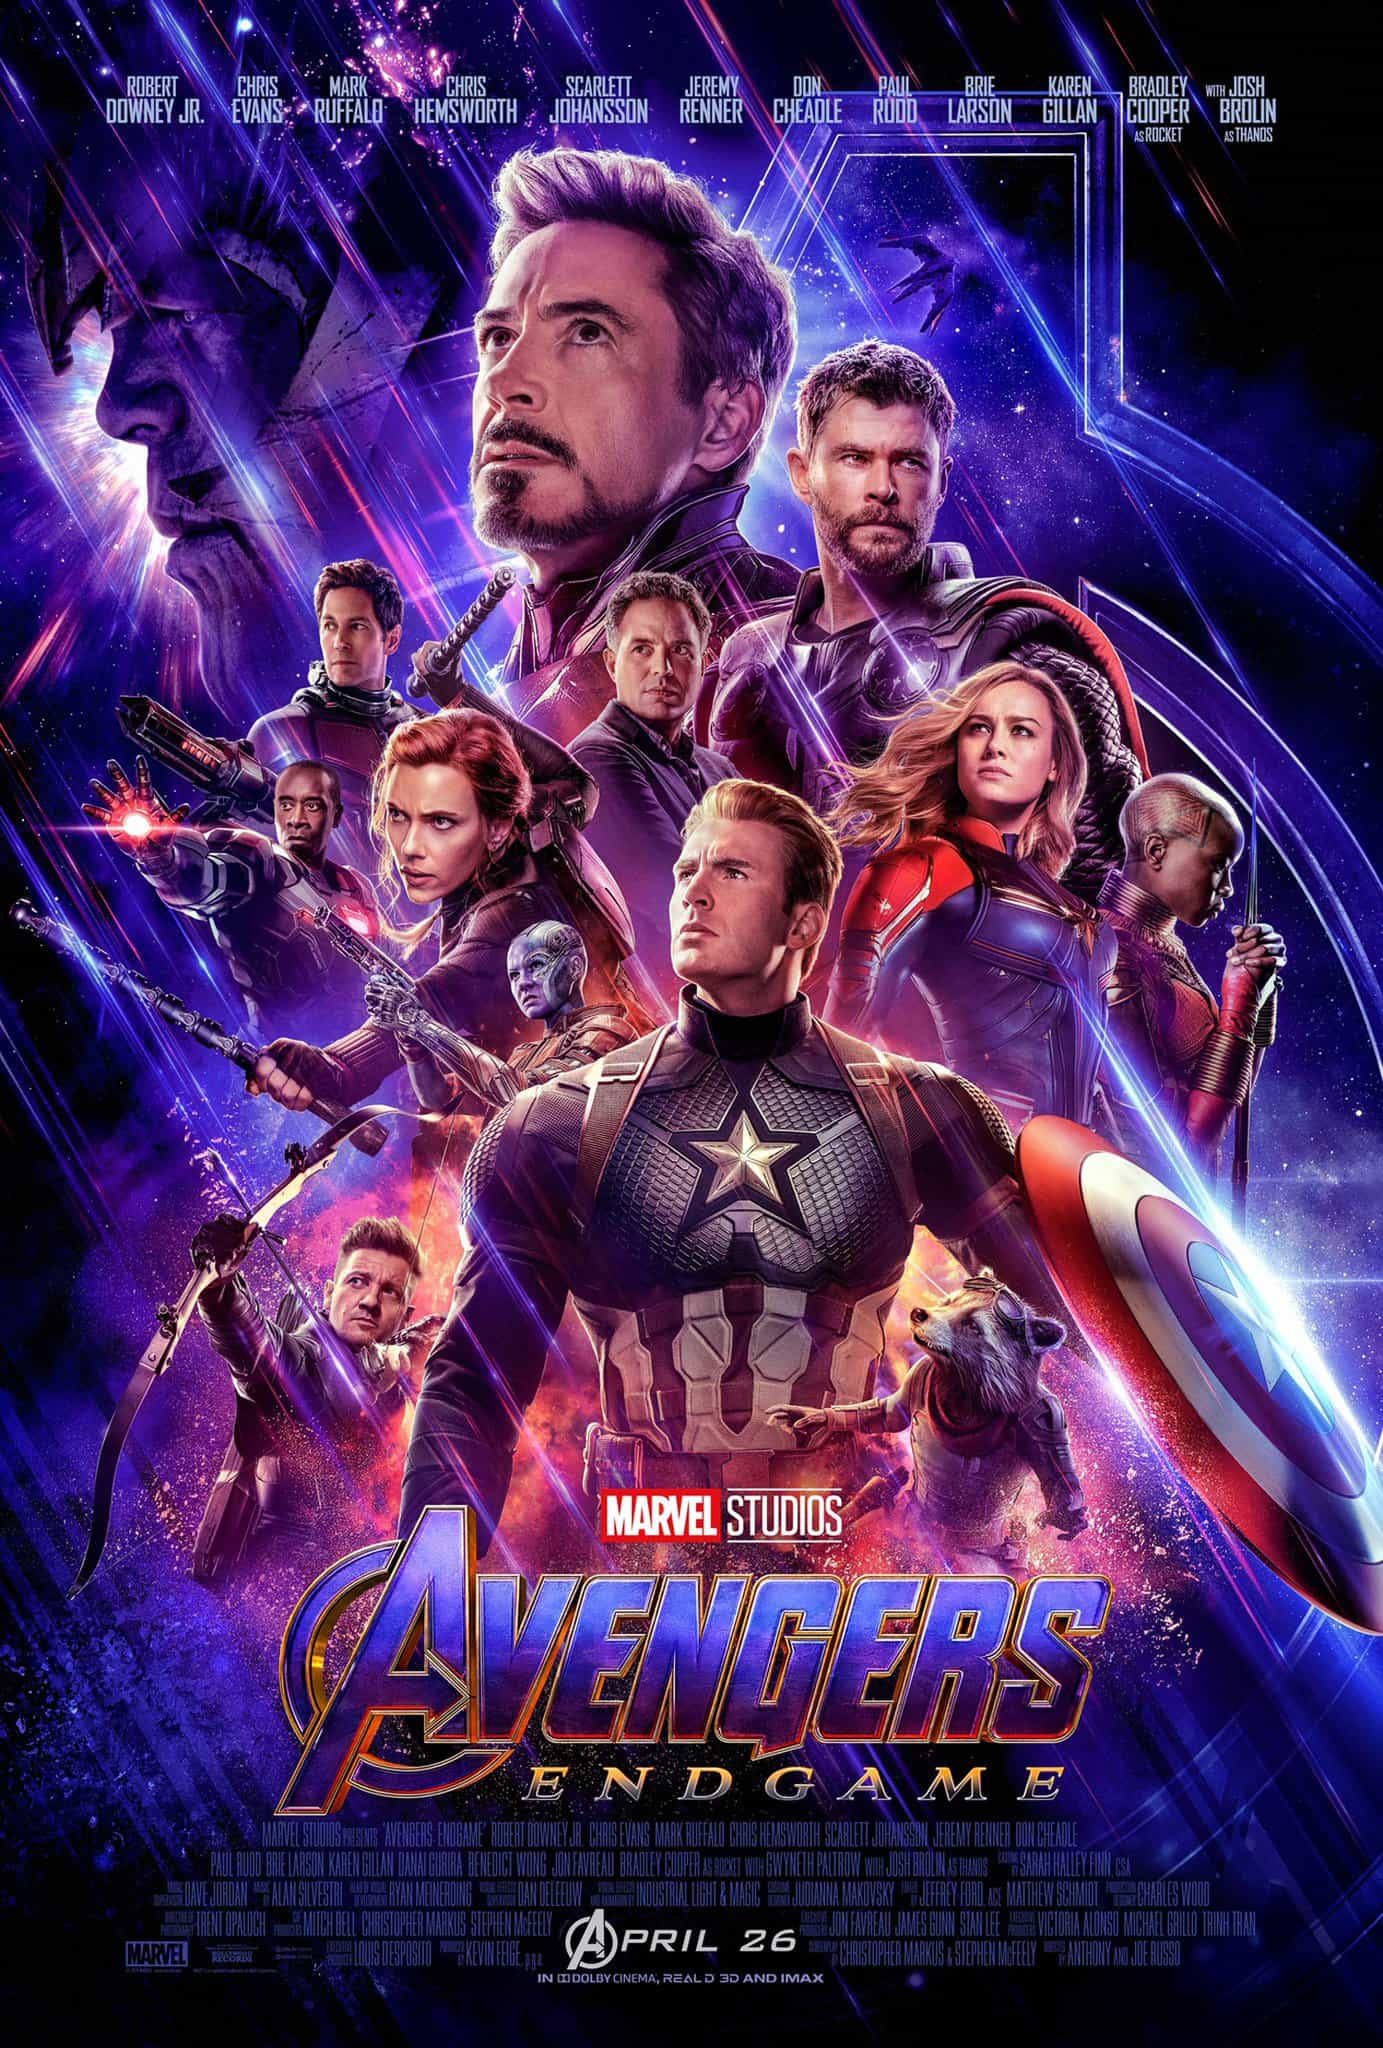 Avengers Endgame gets a 12A rating in the UK for moderate violence